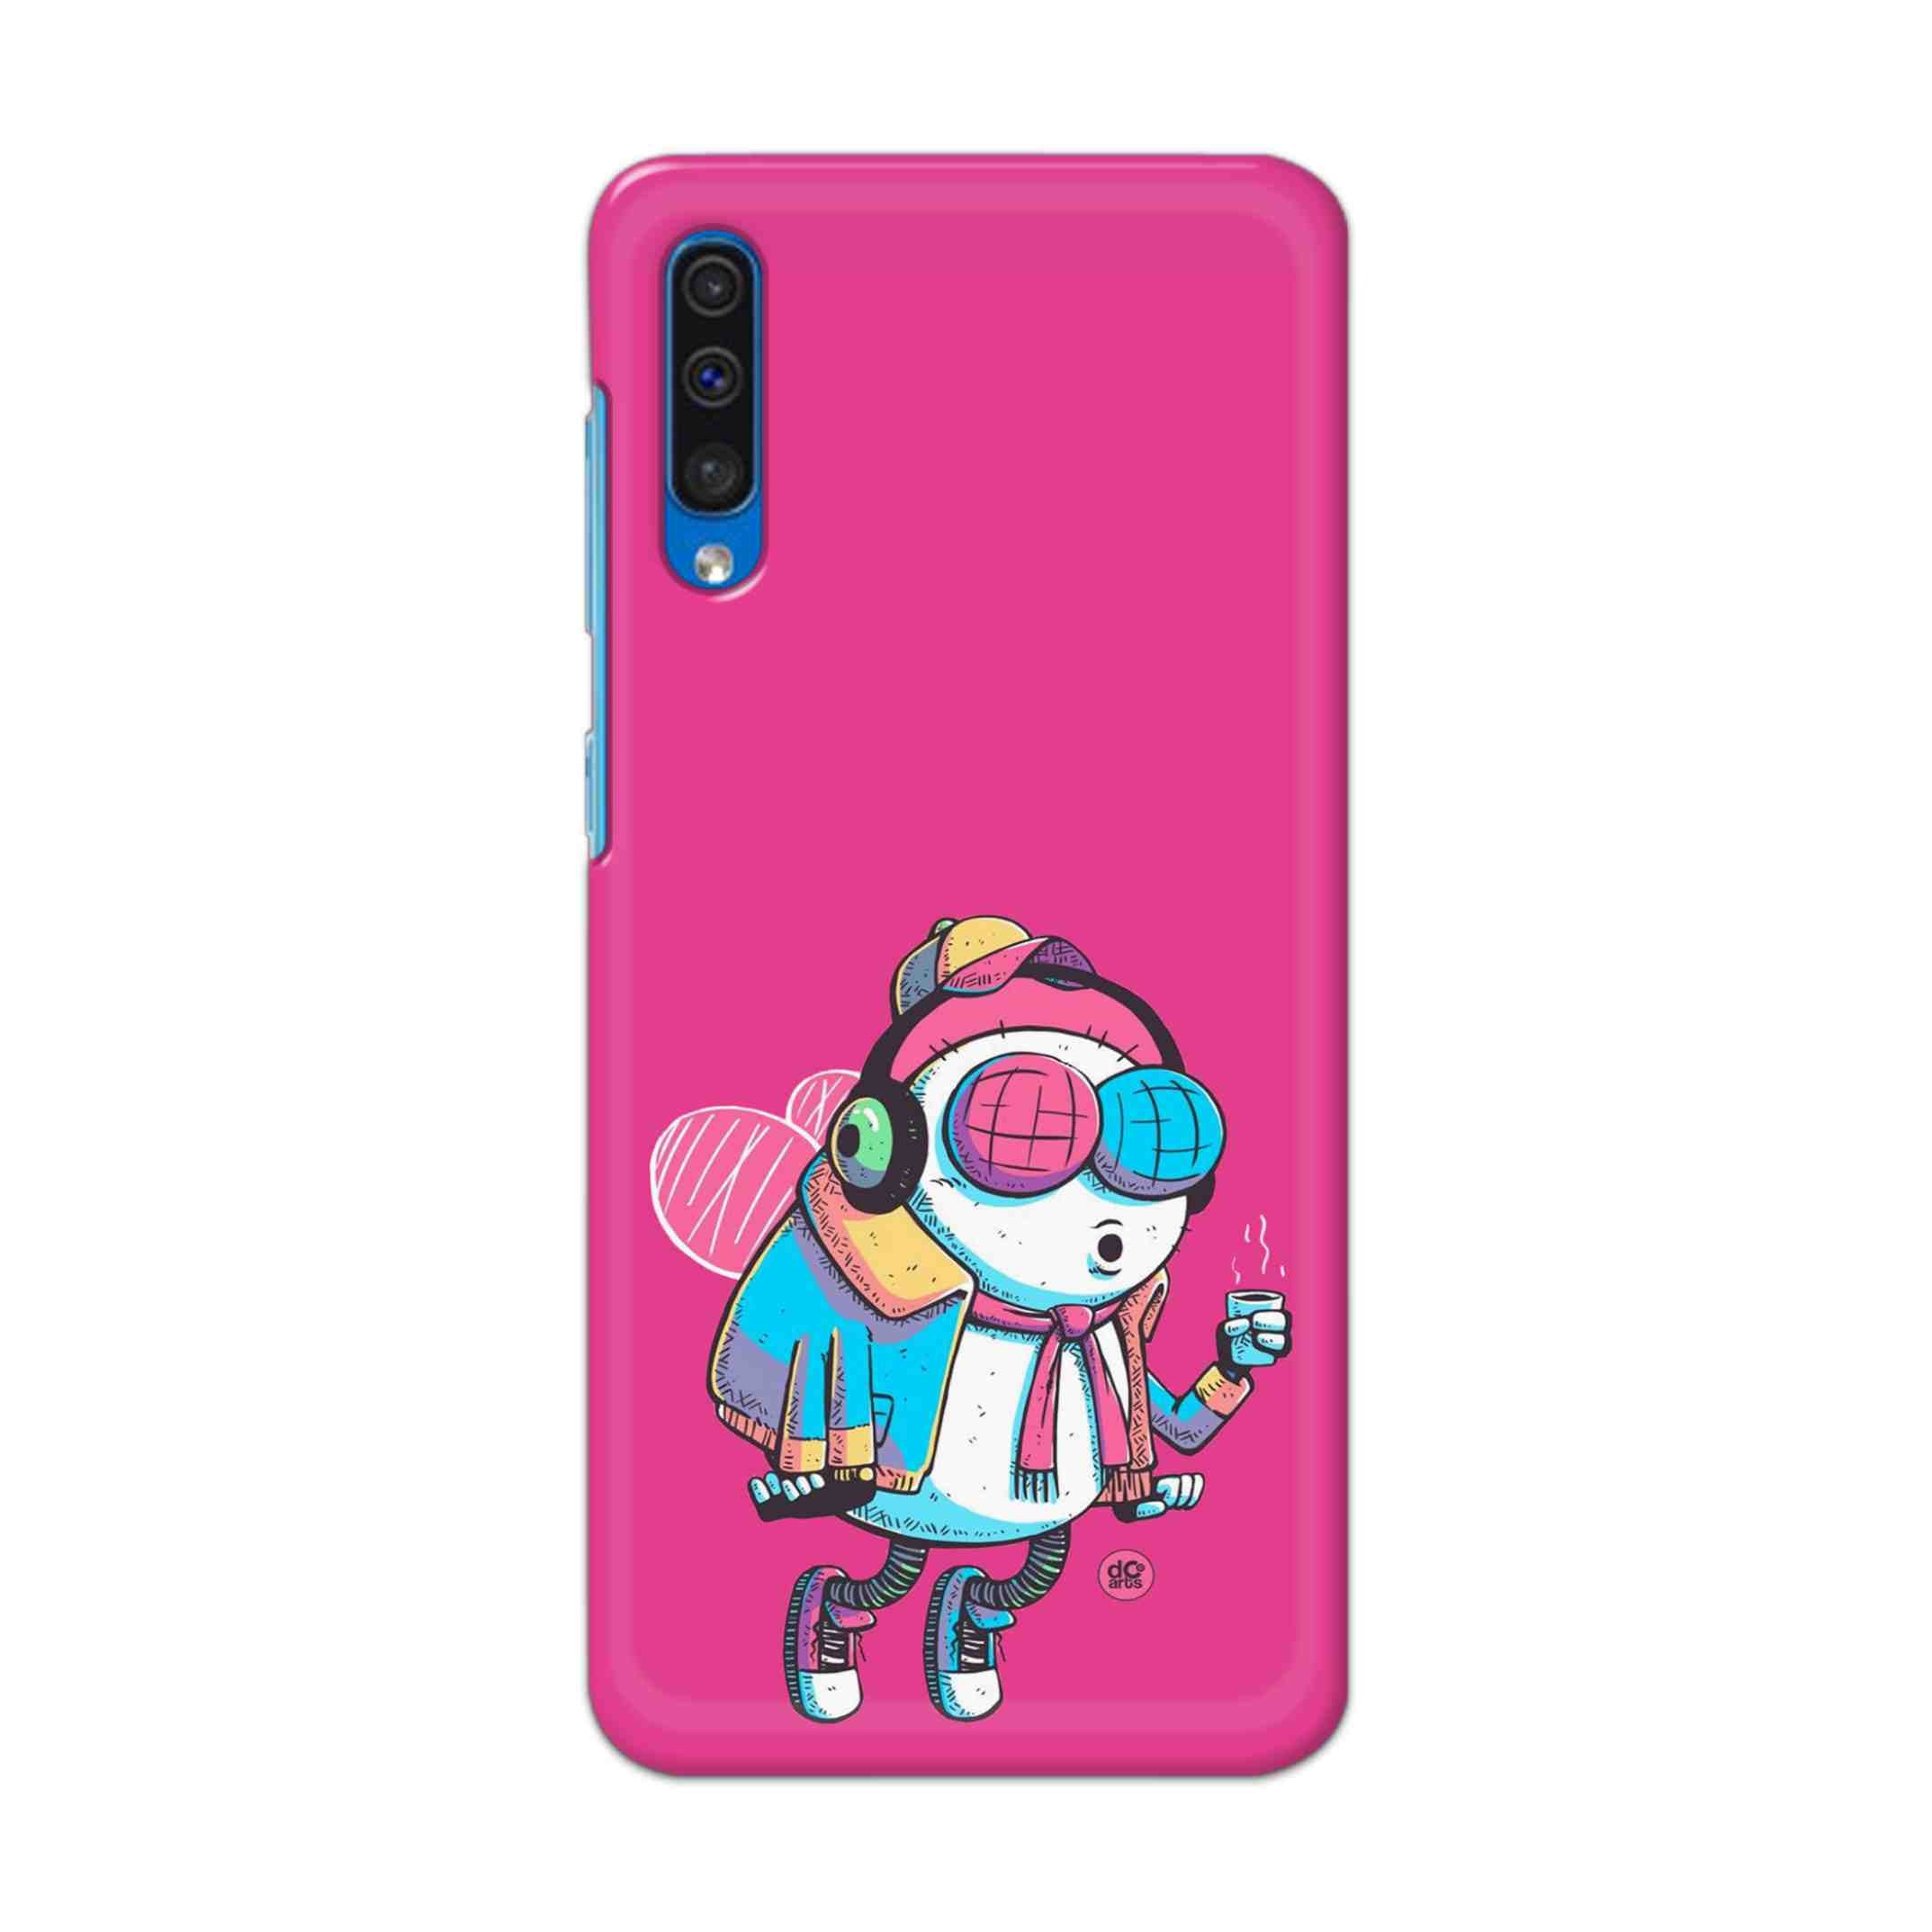 Buy Sky Fly Hard Back Mobile Phone Case Cover For Samsung Galaxy A50 / A50s / A30s Online